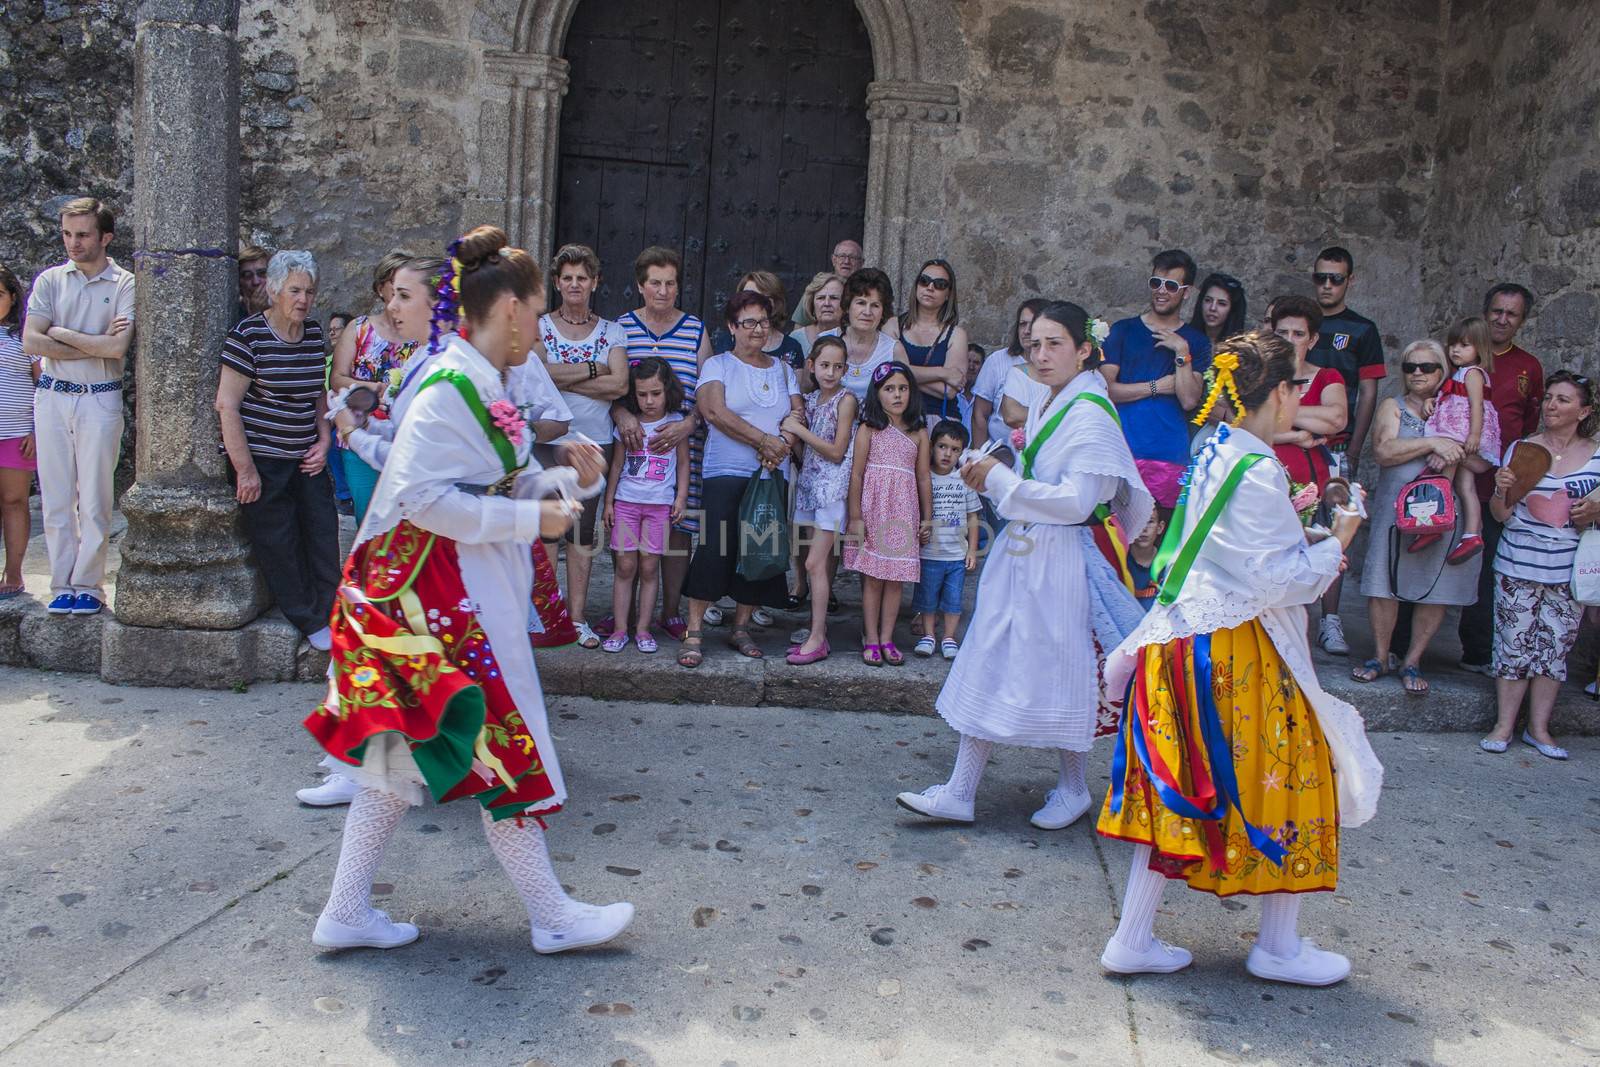 Dance of Las Italinas, also known as Dance of the Gypsy of Caceres village of Garganta la Olla. The dances are performed by eight women, a dance teacher or "father" and the drummer accompanies the festivities in honor of the Visitation of the Virgin, July 1, 2013, 